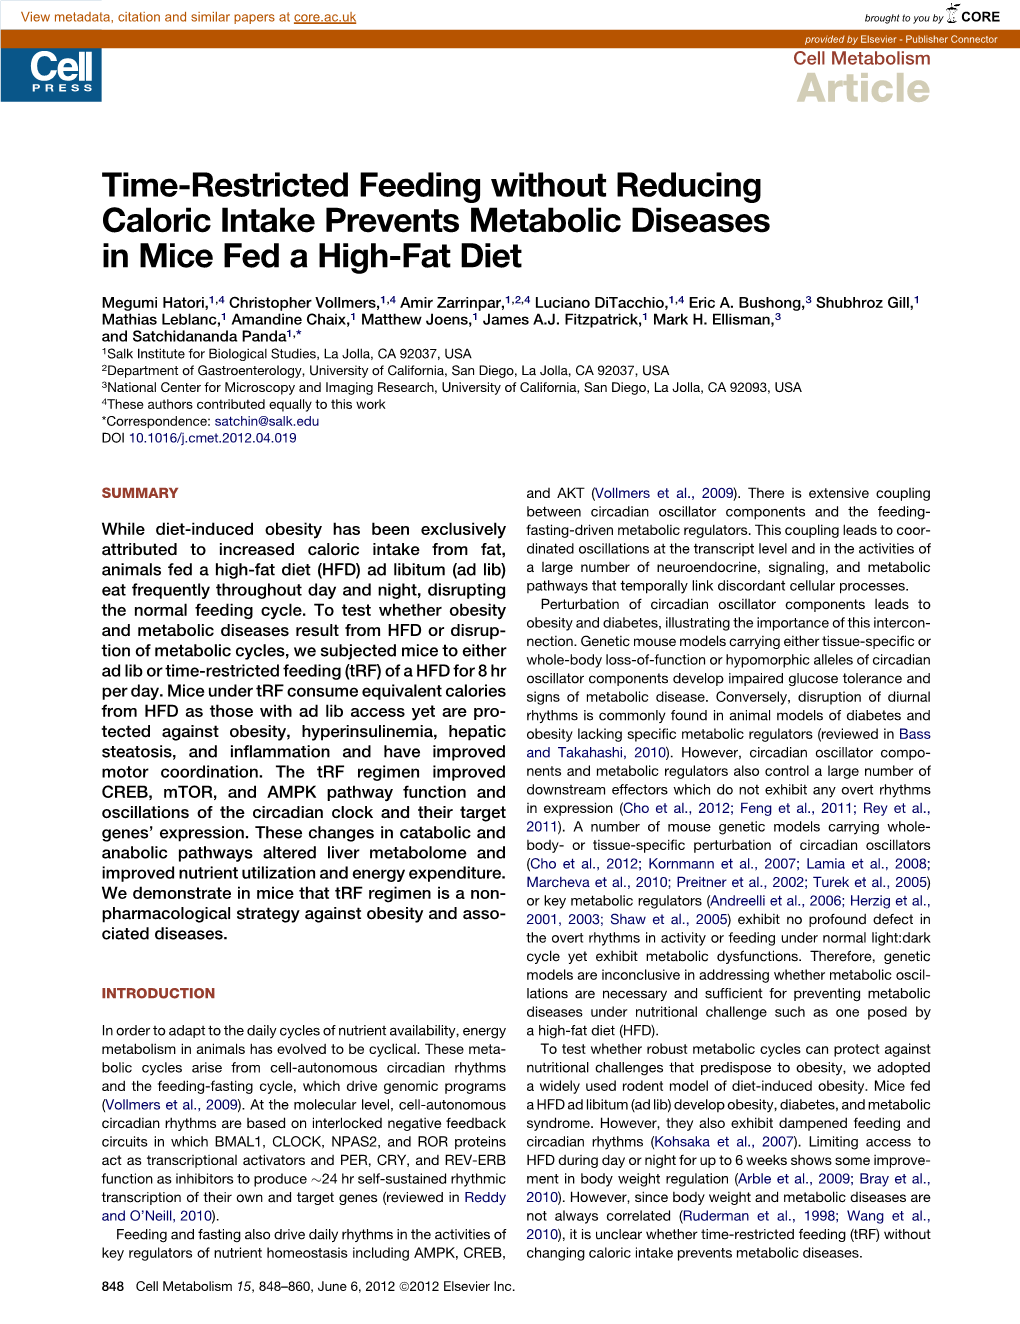 Time-Restricted Feeding Without Reducing Caloric Intake Prevents Metabolic Diseases in Mice Fed a High-Fat Diet